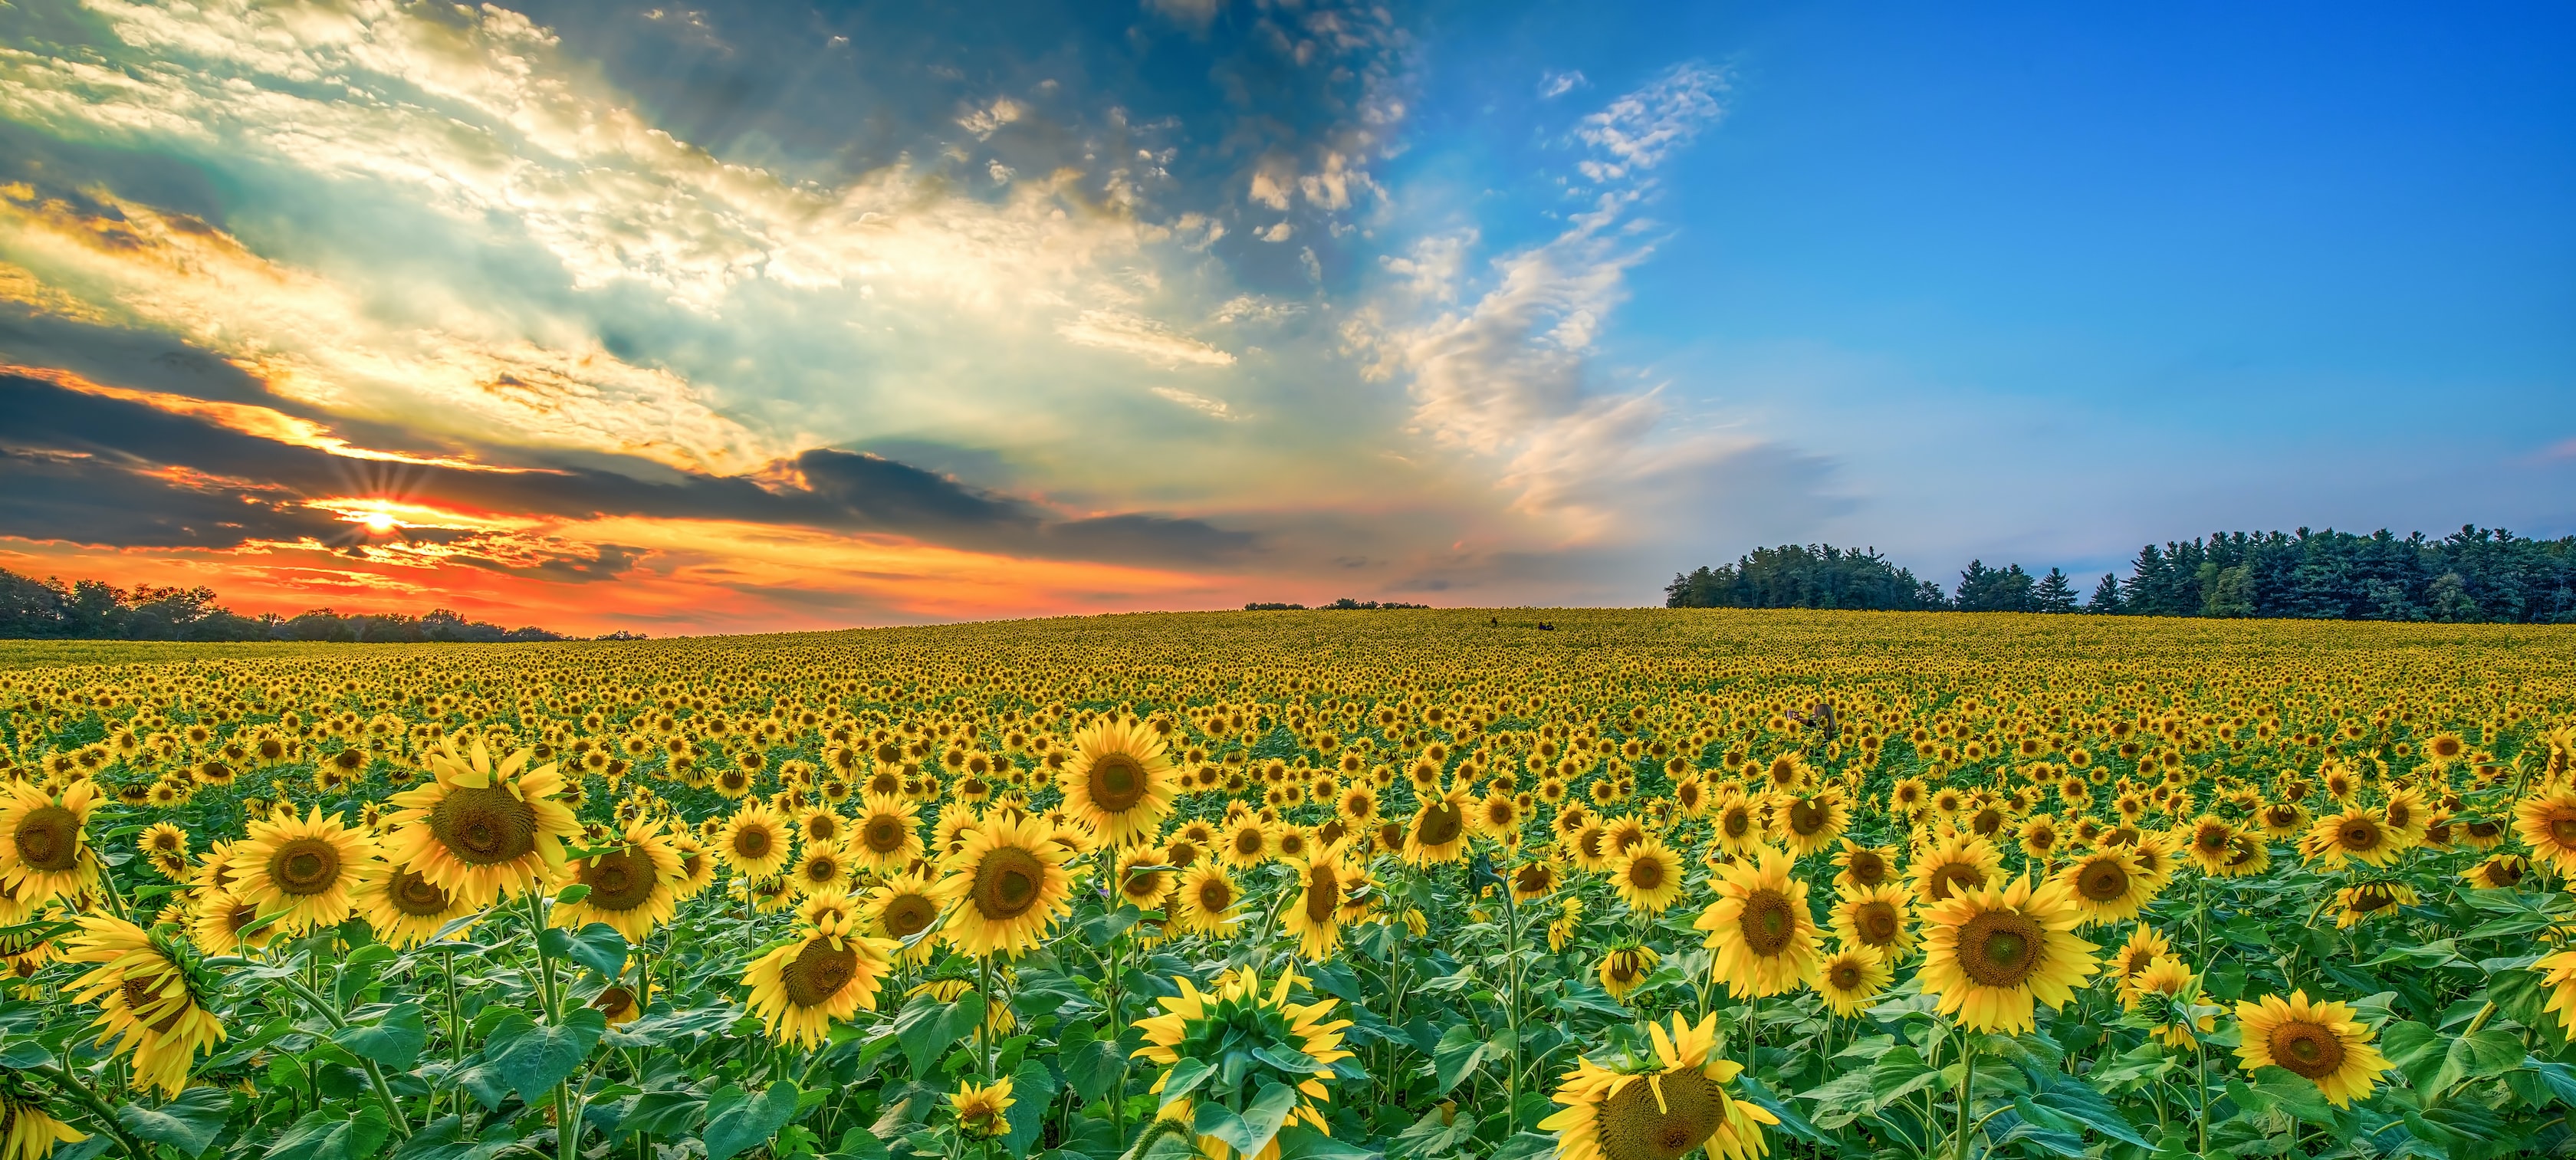 photograph of field of sunflowers and sky split between clear blue and sunset red